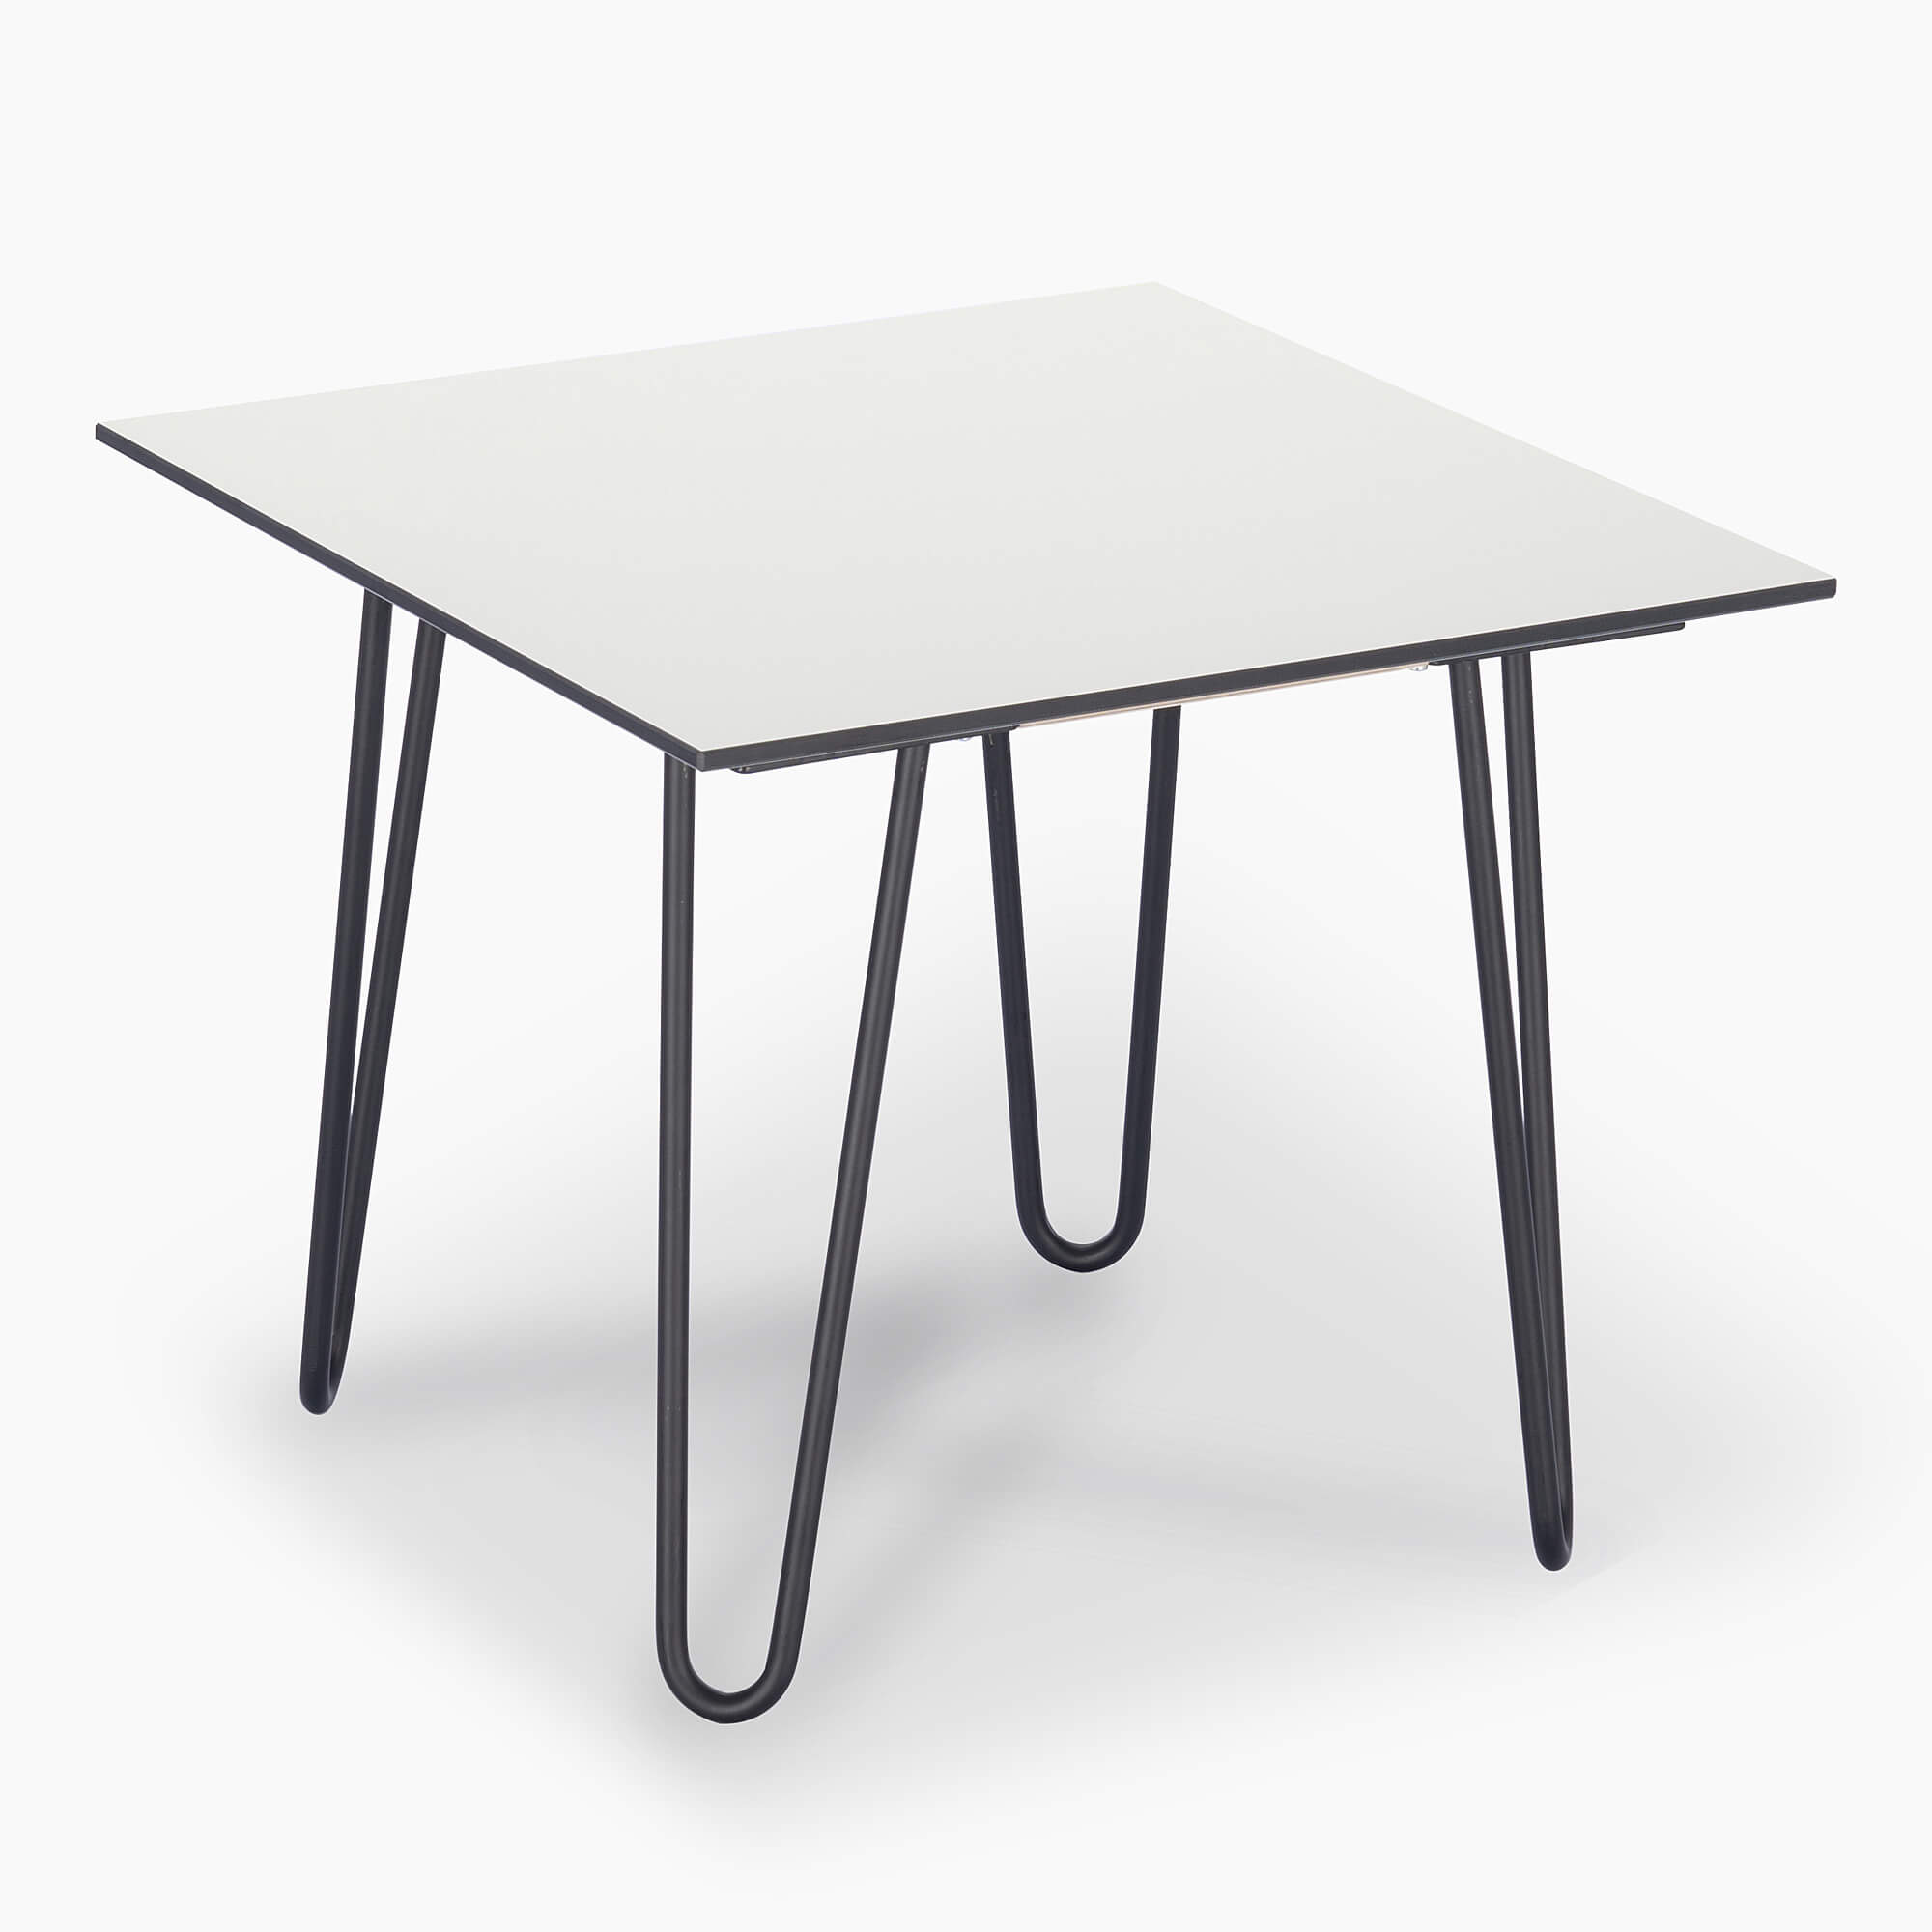 Tea-table-side table-modern-white-with-corners